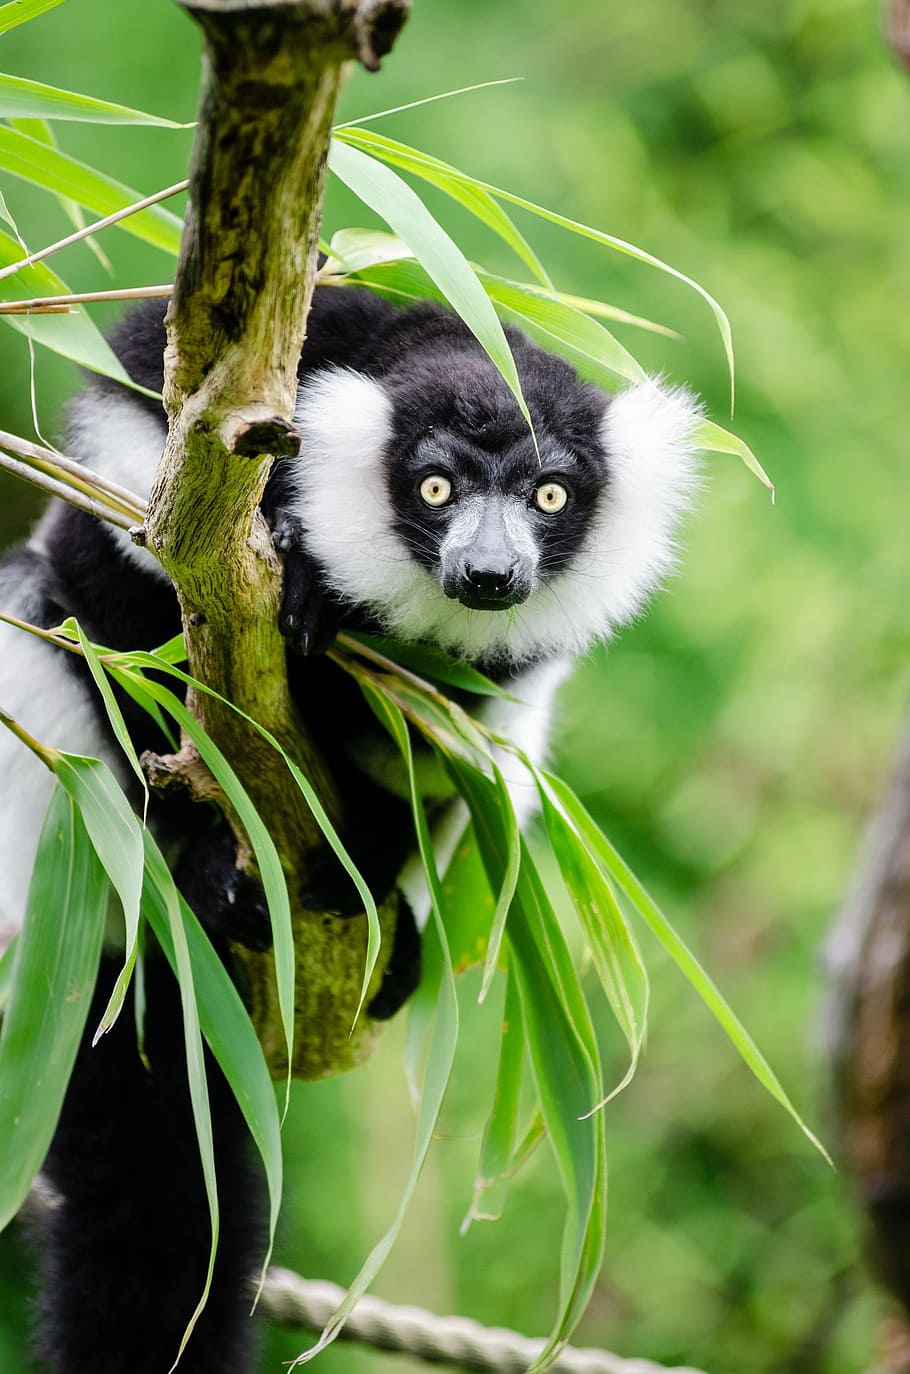 white and black animal on tree branch at daytime, black and white ruffed lemur, HD wallpaper